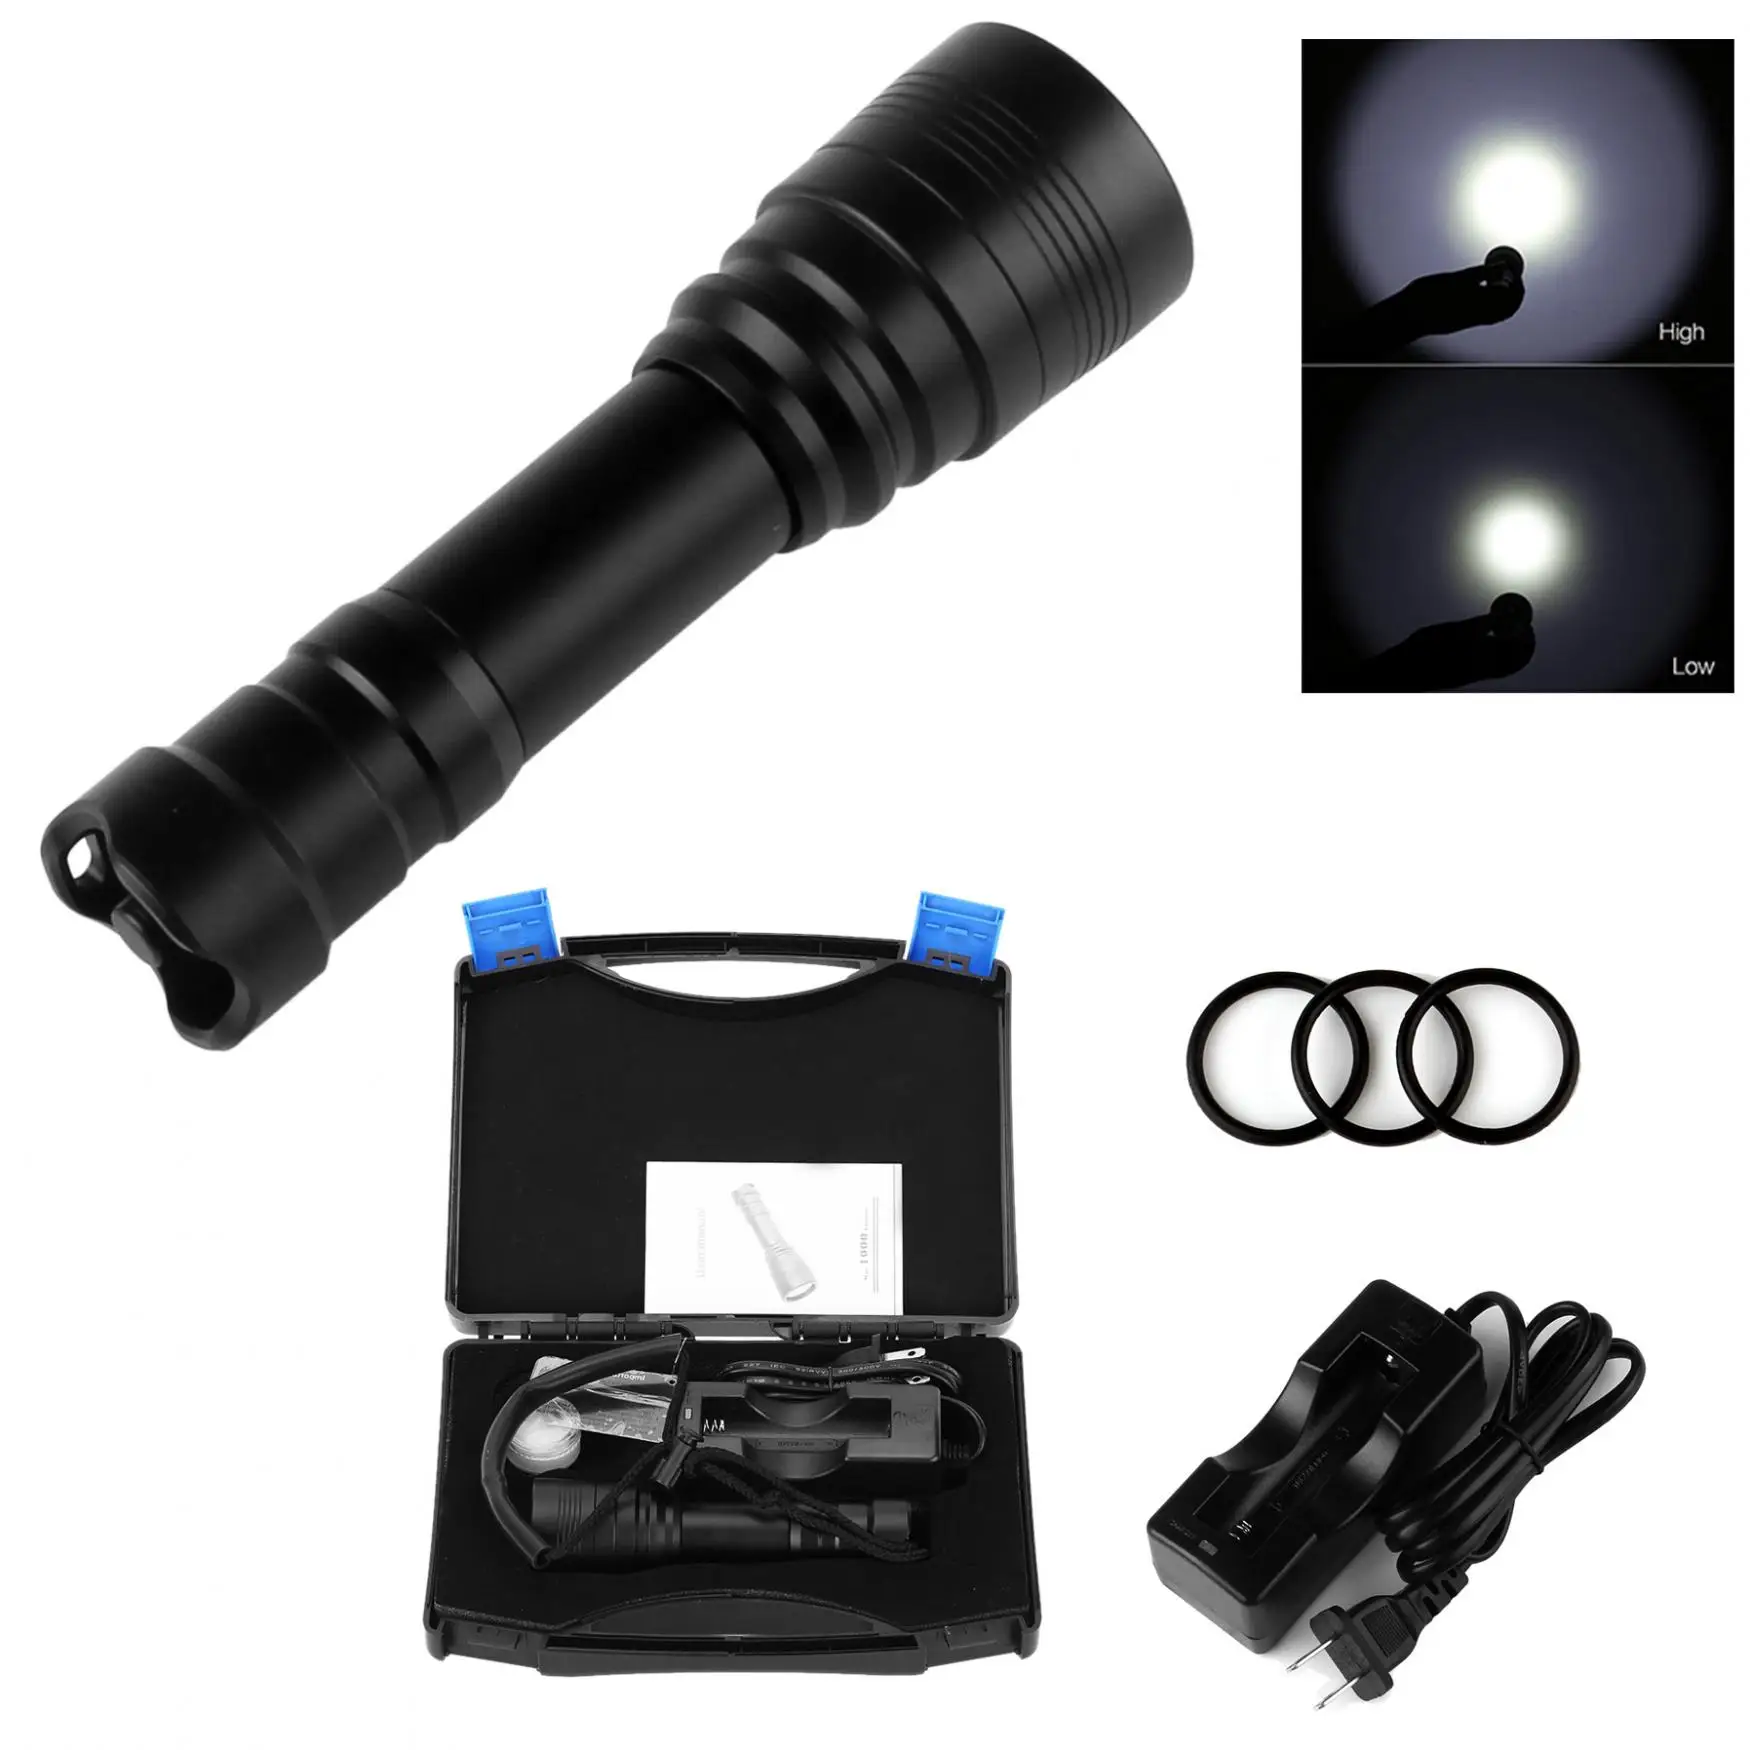 

Waterproof High Power Underwater 150m 1000Lm XM-L2/U2 Handheld Diving Flashlight Lamp Torch + 18650 Battery + Charger